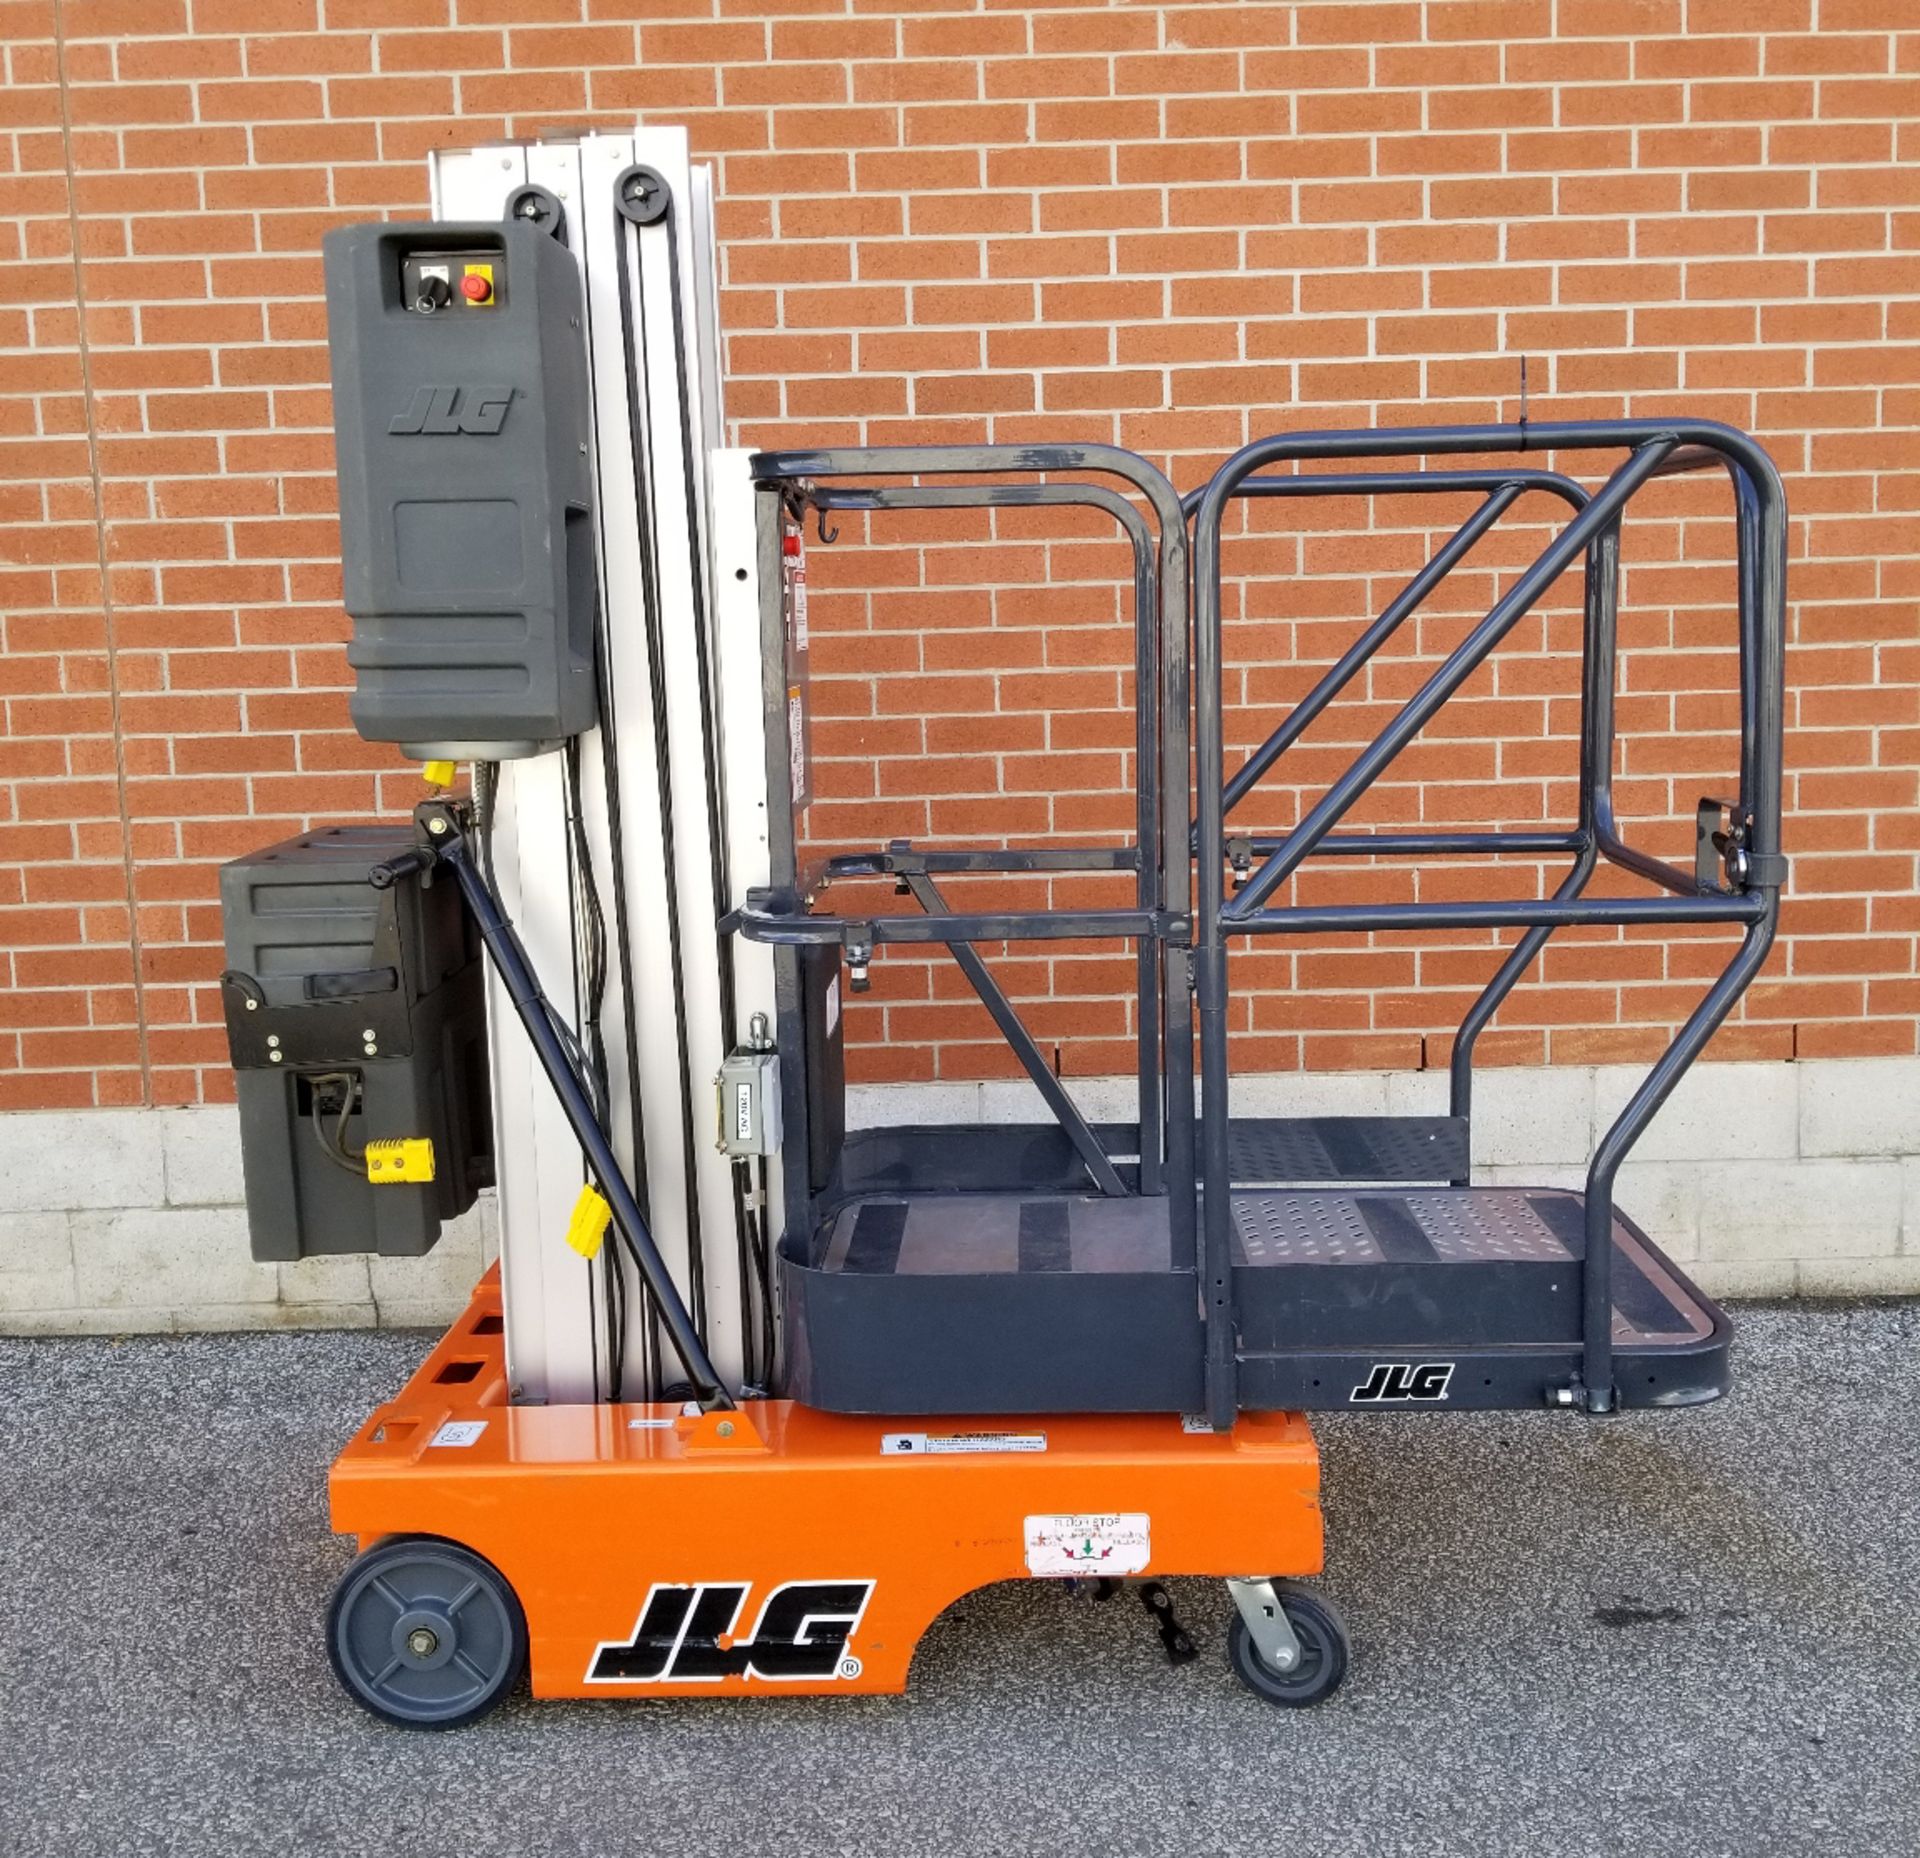 JLG (2006) 15SP PUSH AROUND STOCK PICKER WITH 500 LB. CAPACITY, 180" MAX. WORK HEIGHT, ON-BOARD